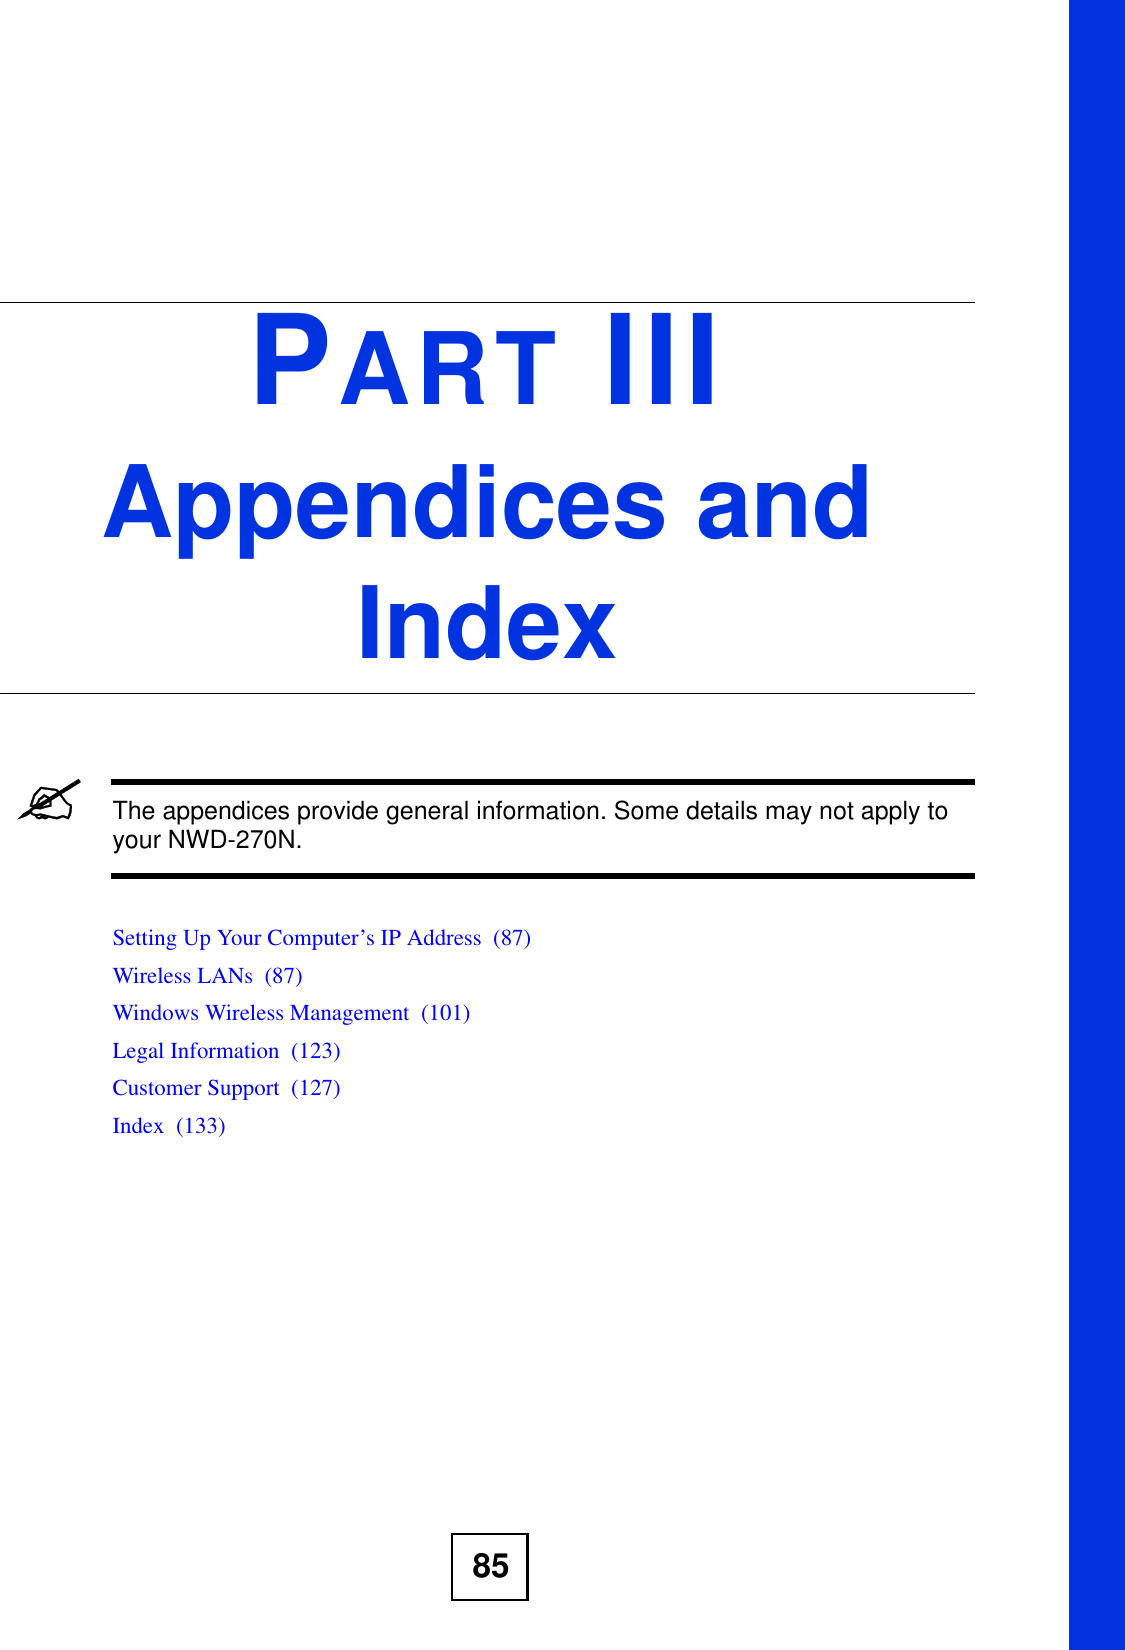 85PART IIIAppendices and Index&quot;The appendices provide general information. Some details may not apply to your NWD-270N.Setting Up Your Computer’s IP Address  (87)Wireless LANs  (87)Windows Wireless Management  (101)Legal Information  (123)Customer Support  (127)Index  (133)